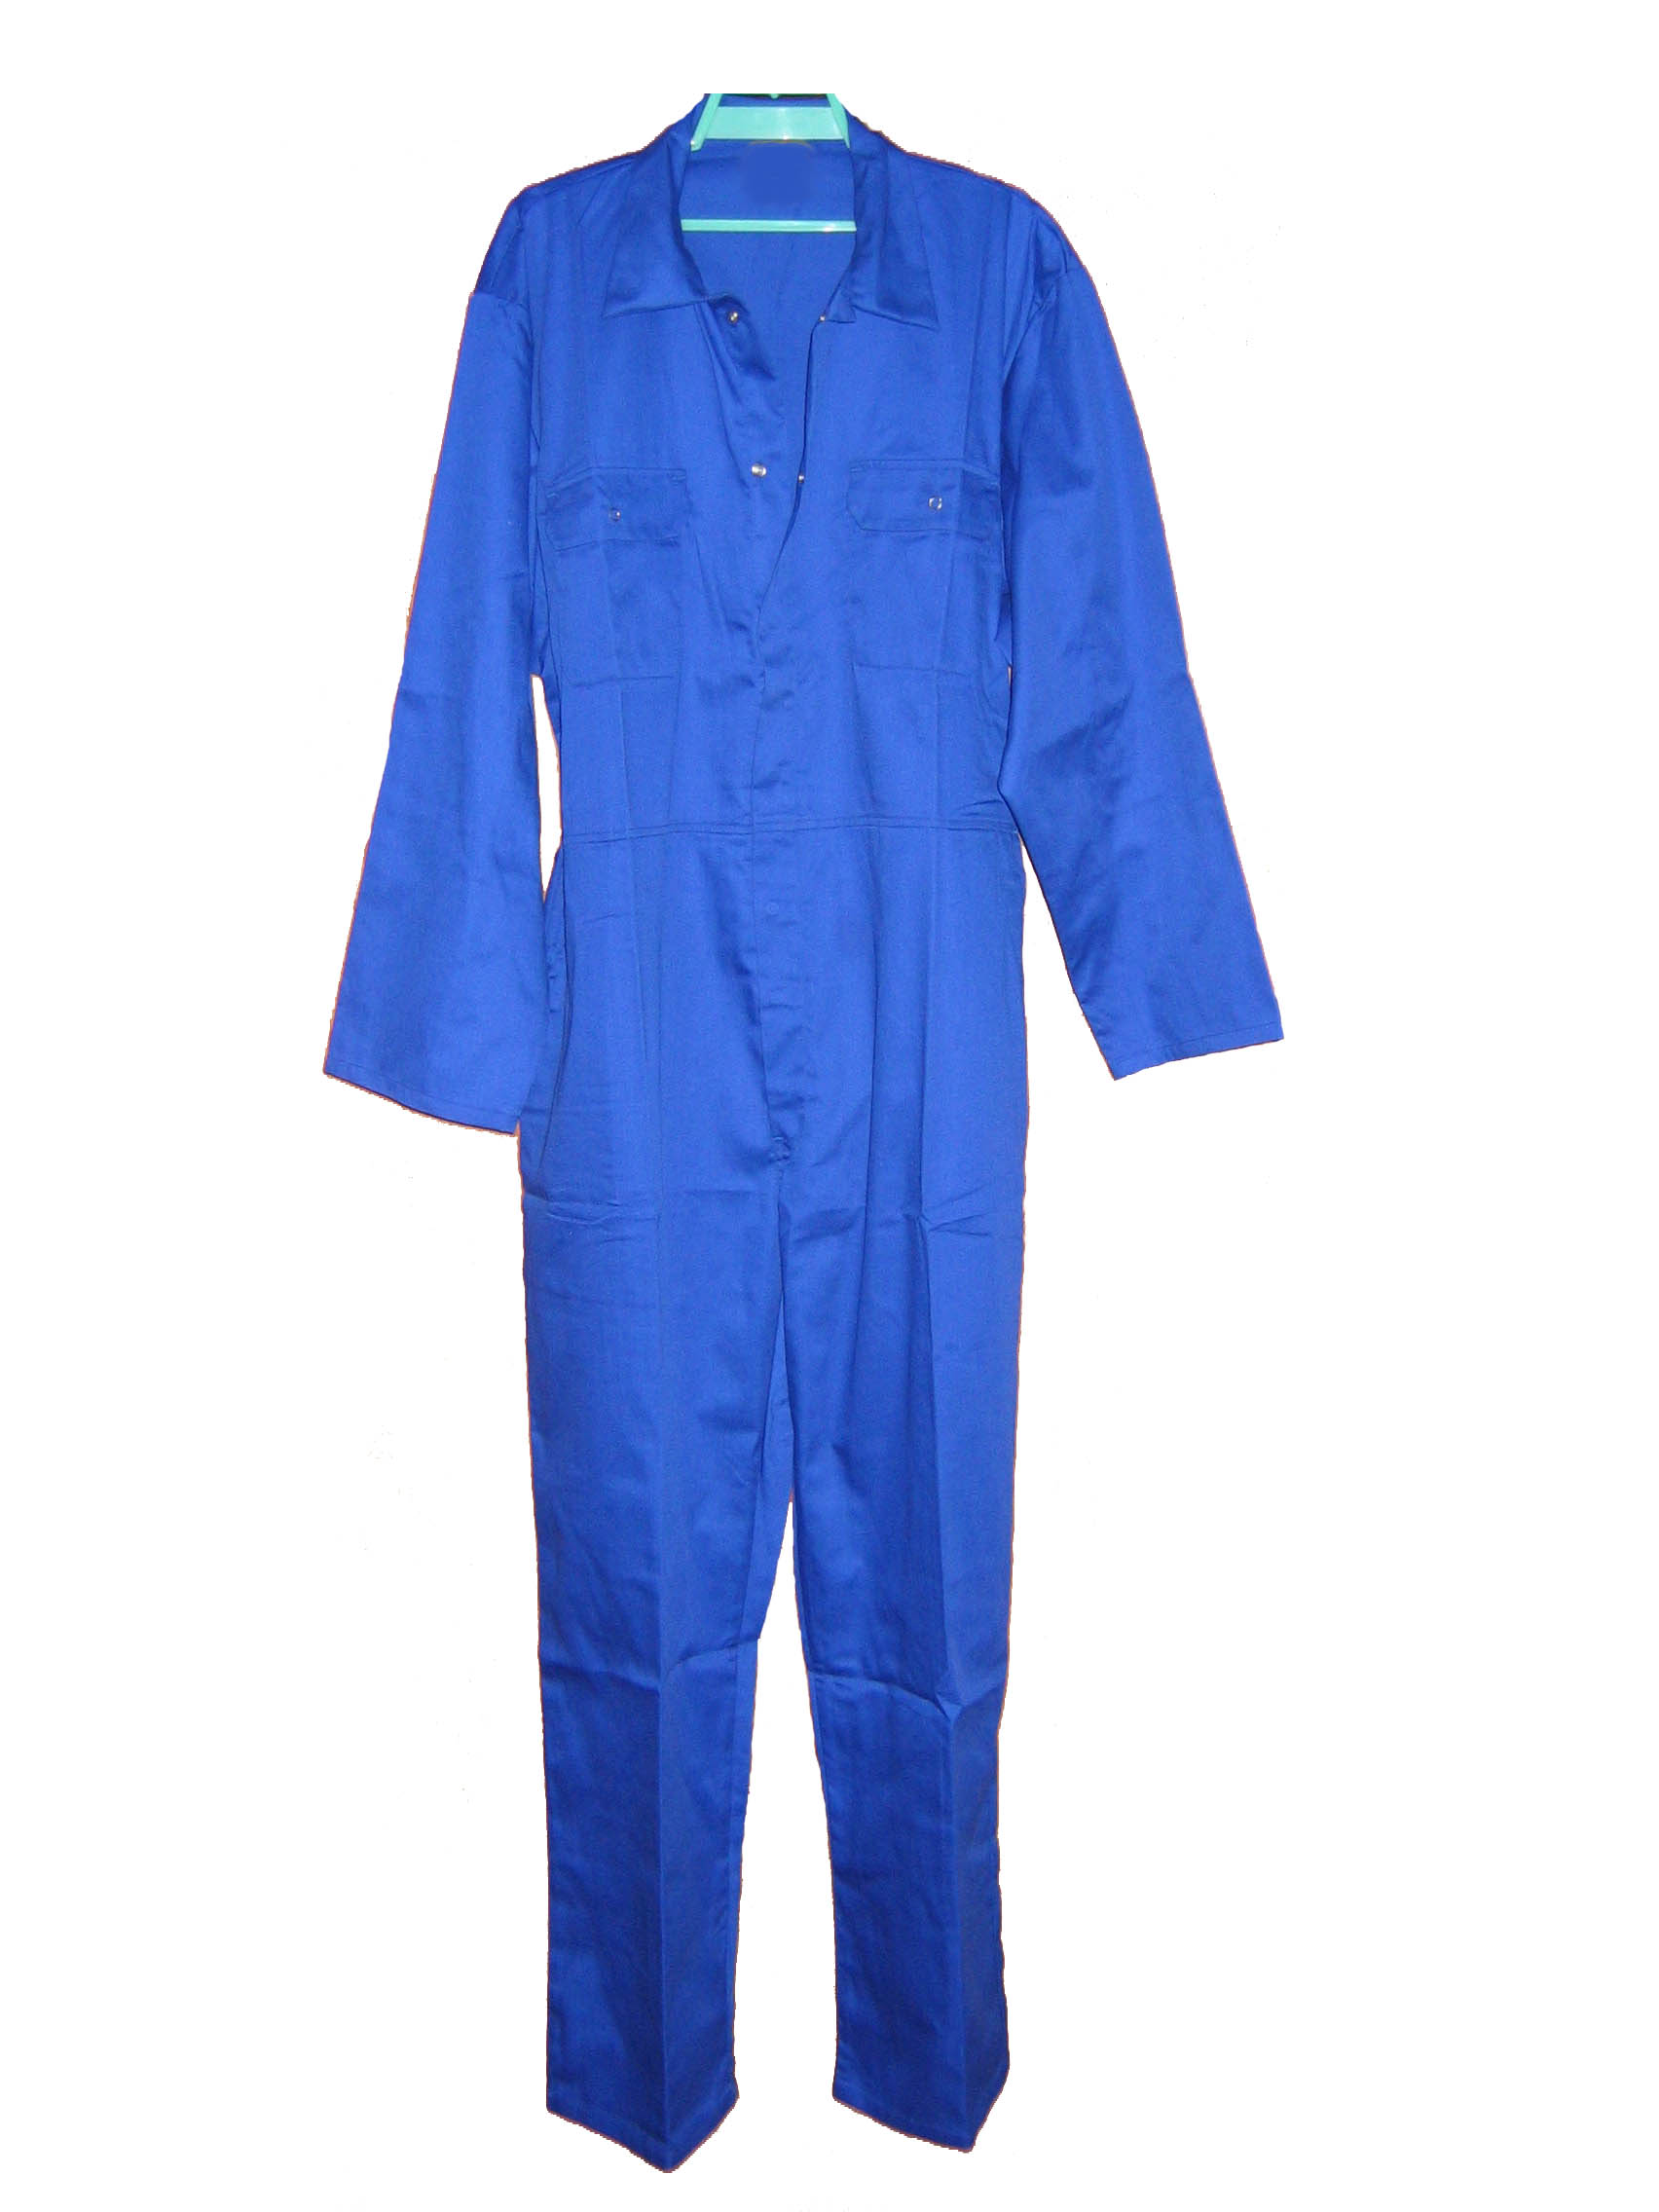 Royal blue worker safety coverall